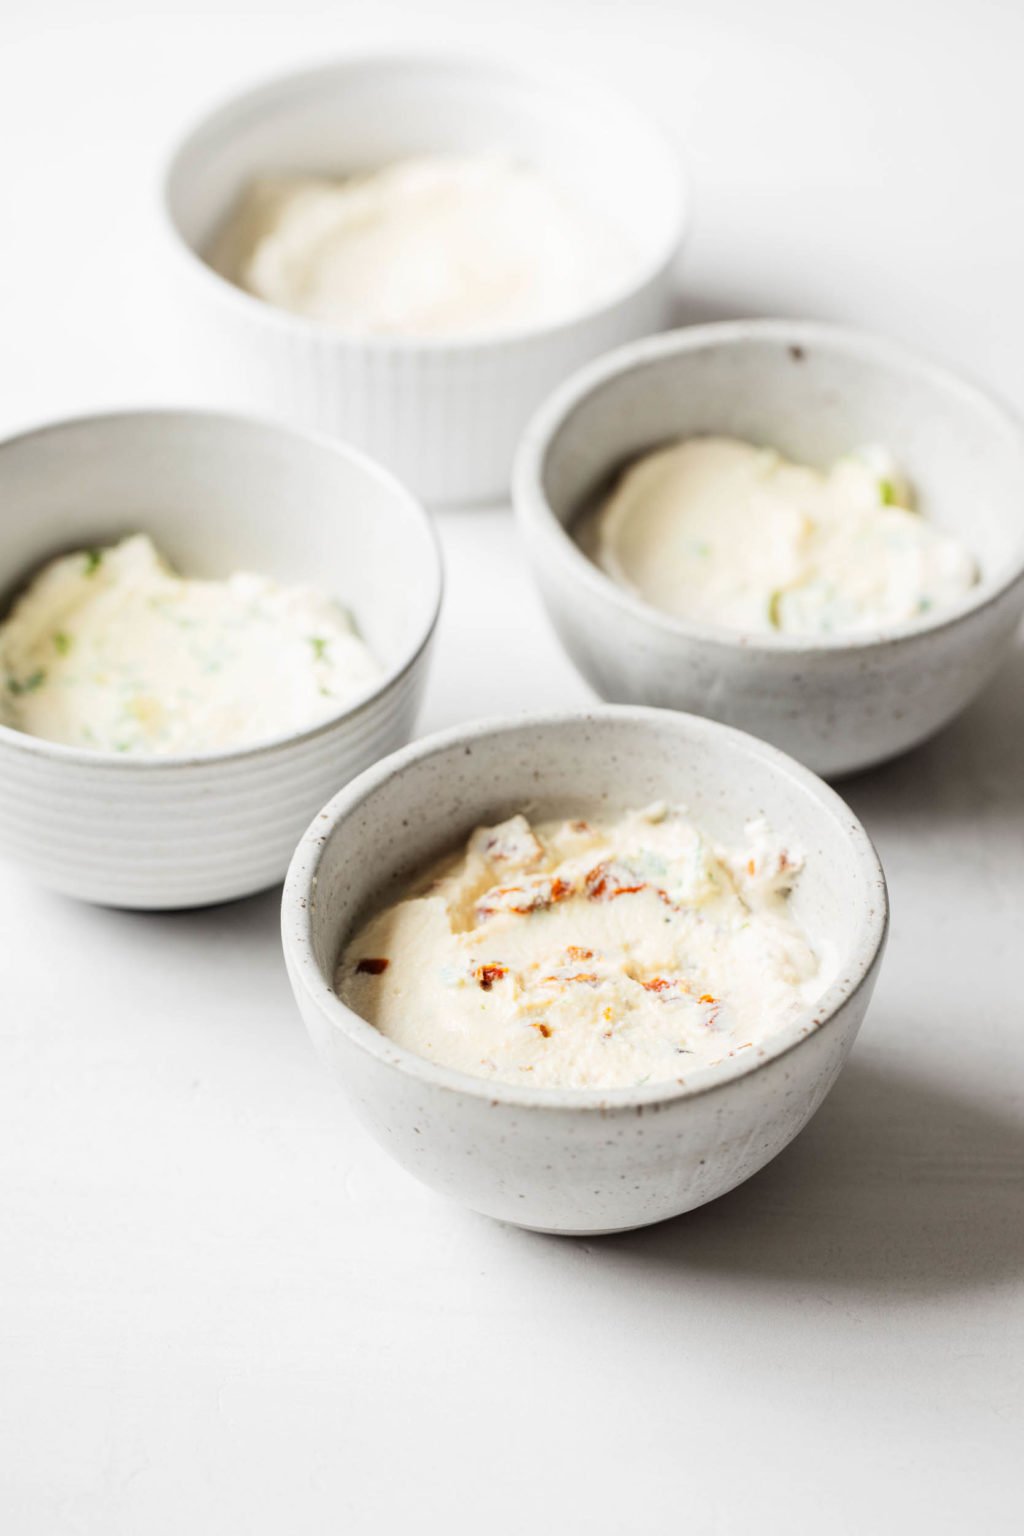 An angled photograph of four small pinch bowls, each filled with a creamy spread, against a white surface.